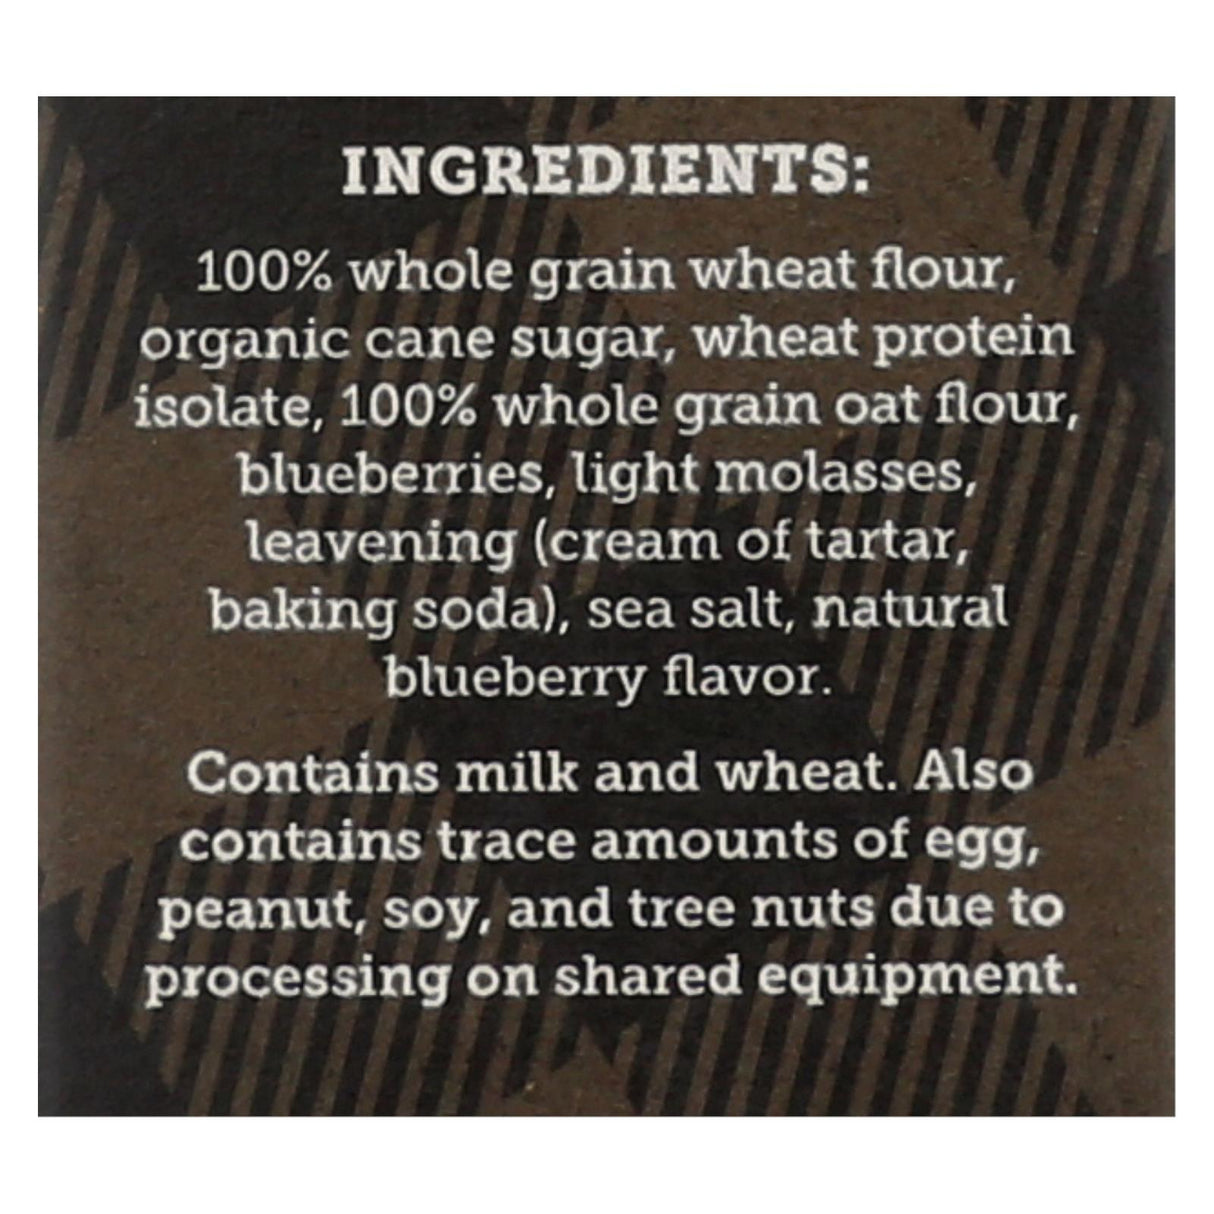 Kodiak Cakes Blueberry Muffin Mix, Protein-Packed, 14 Oz Pack of 6 - Cozy Farm 